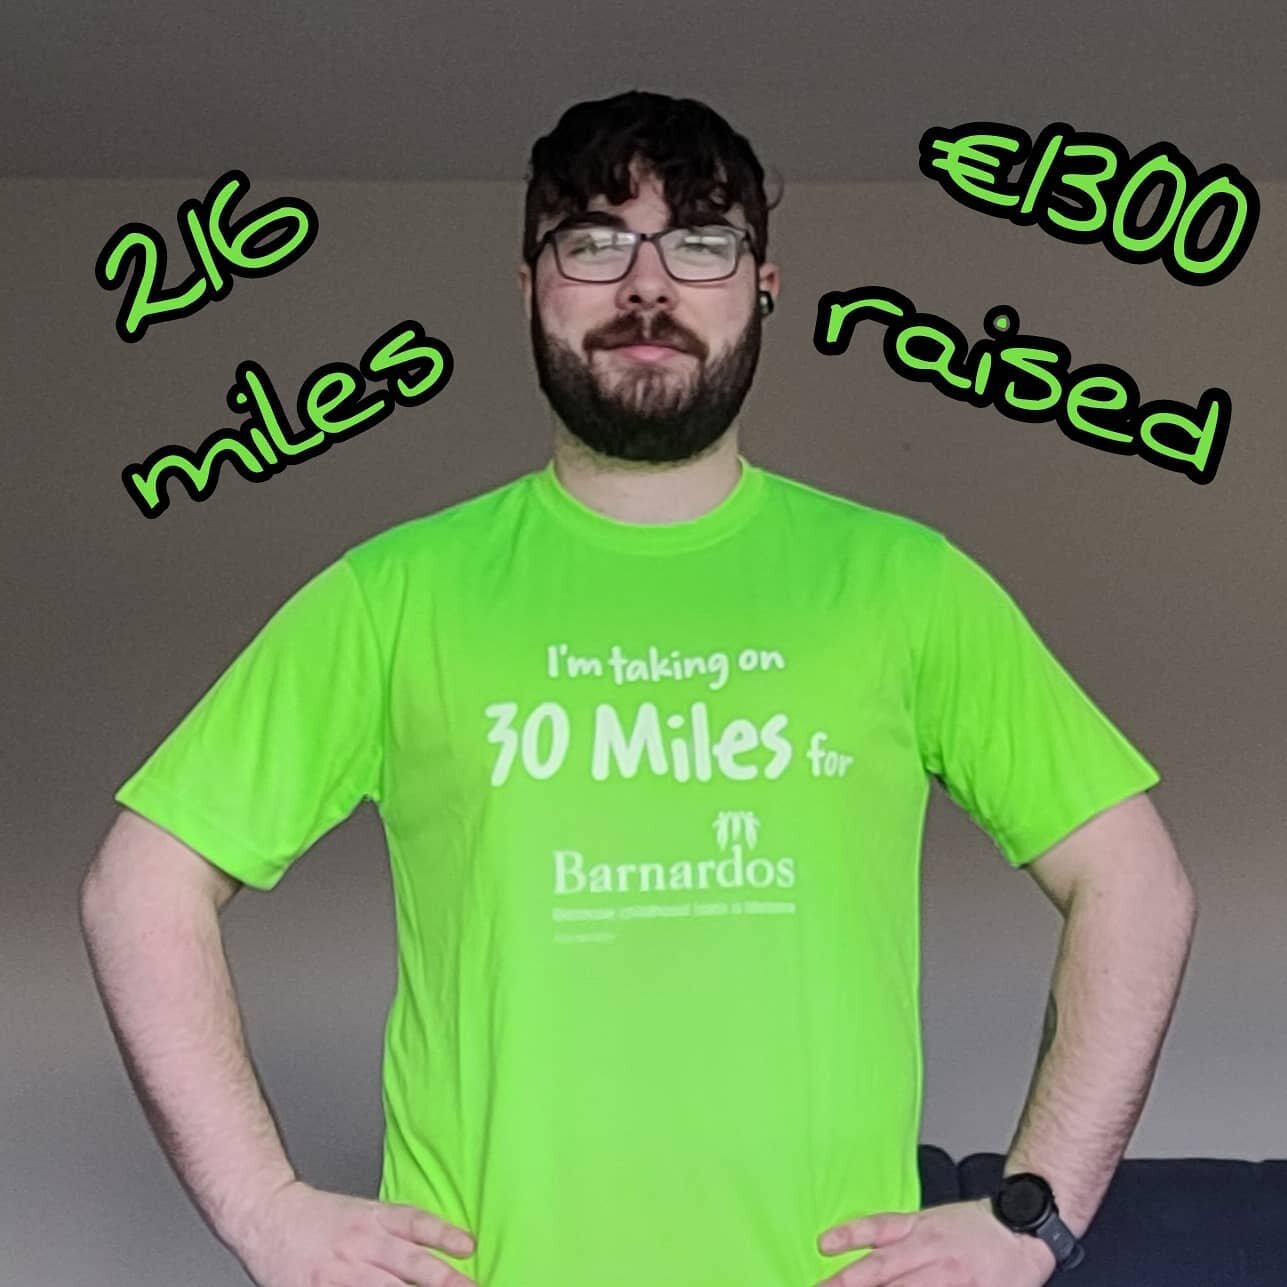 That's it done and dusted! 

Thanks a million to everyone for their incredibly generous donations. It's been a very enjoyable month. 

Stay safe!

#barnardos #30milesforbarnardos